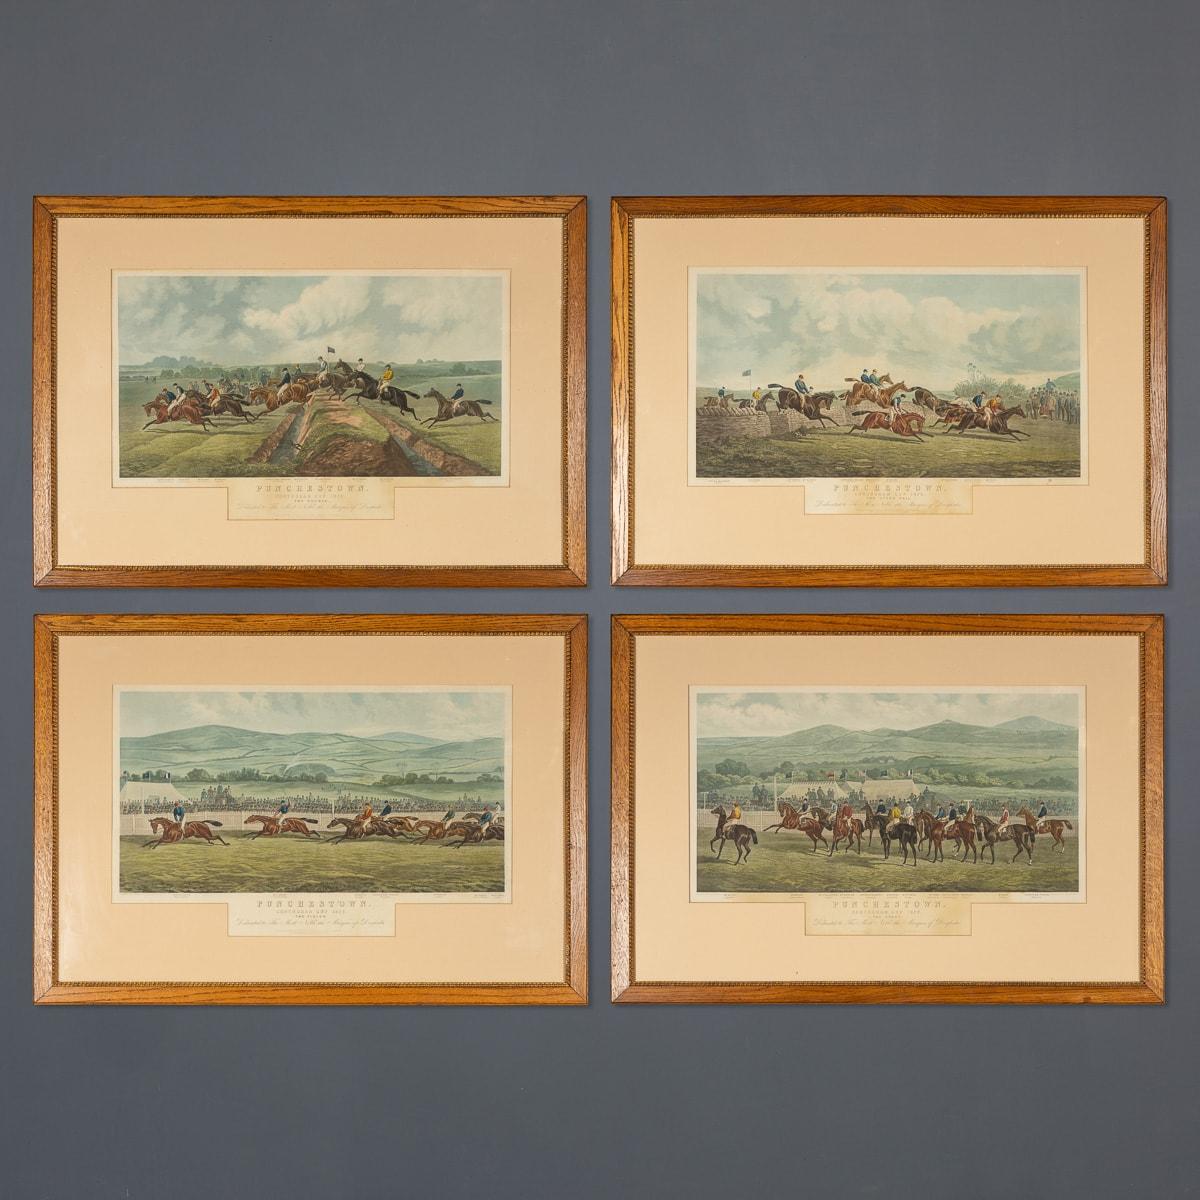 Antique early 20th Century complete series of the famous Conyngham Cup 1872 painted by John Sturgess and engraved by EG Hester. These oak framed hand coloured Aquatints show the Punchestown Racecourse in four fine pictures “The start” in which